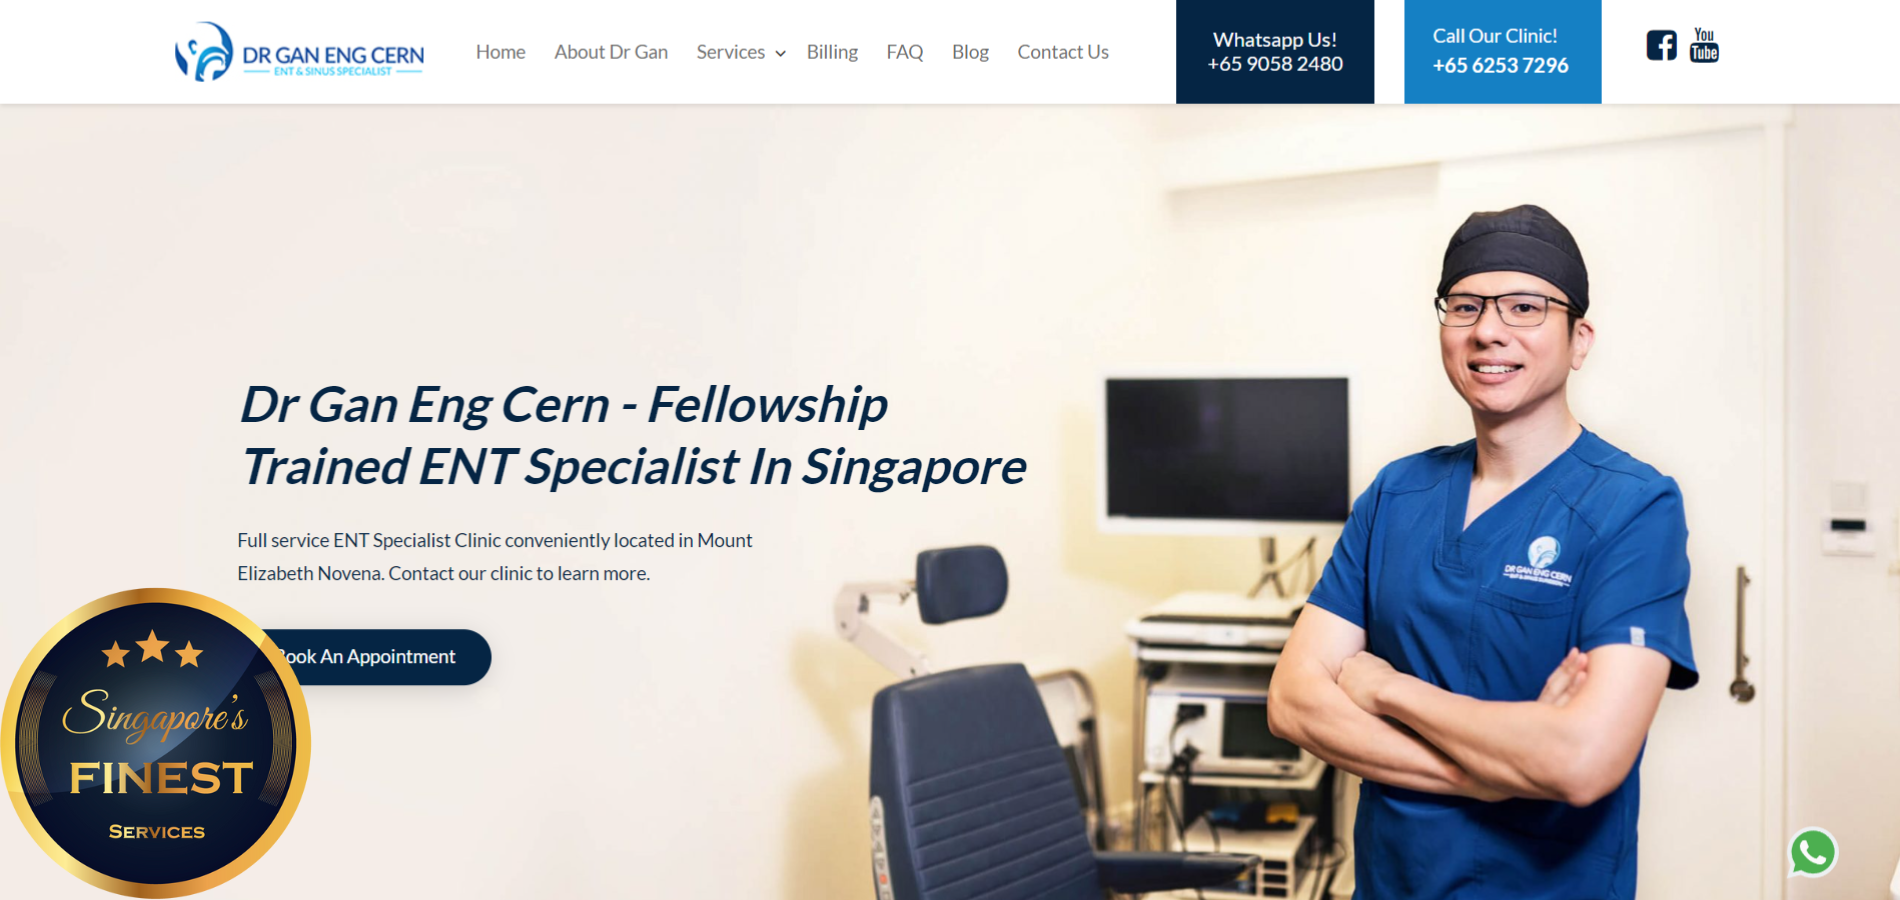 The Finest Tonsil Removal Clinics in Singapore